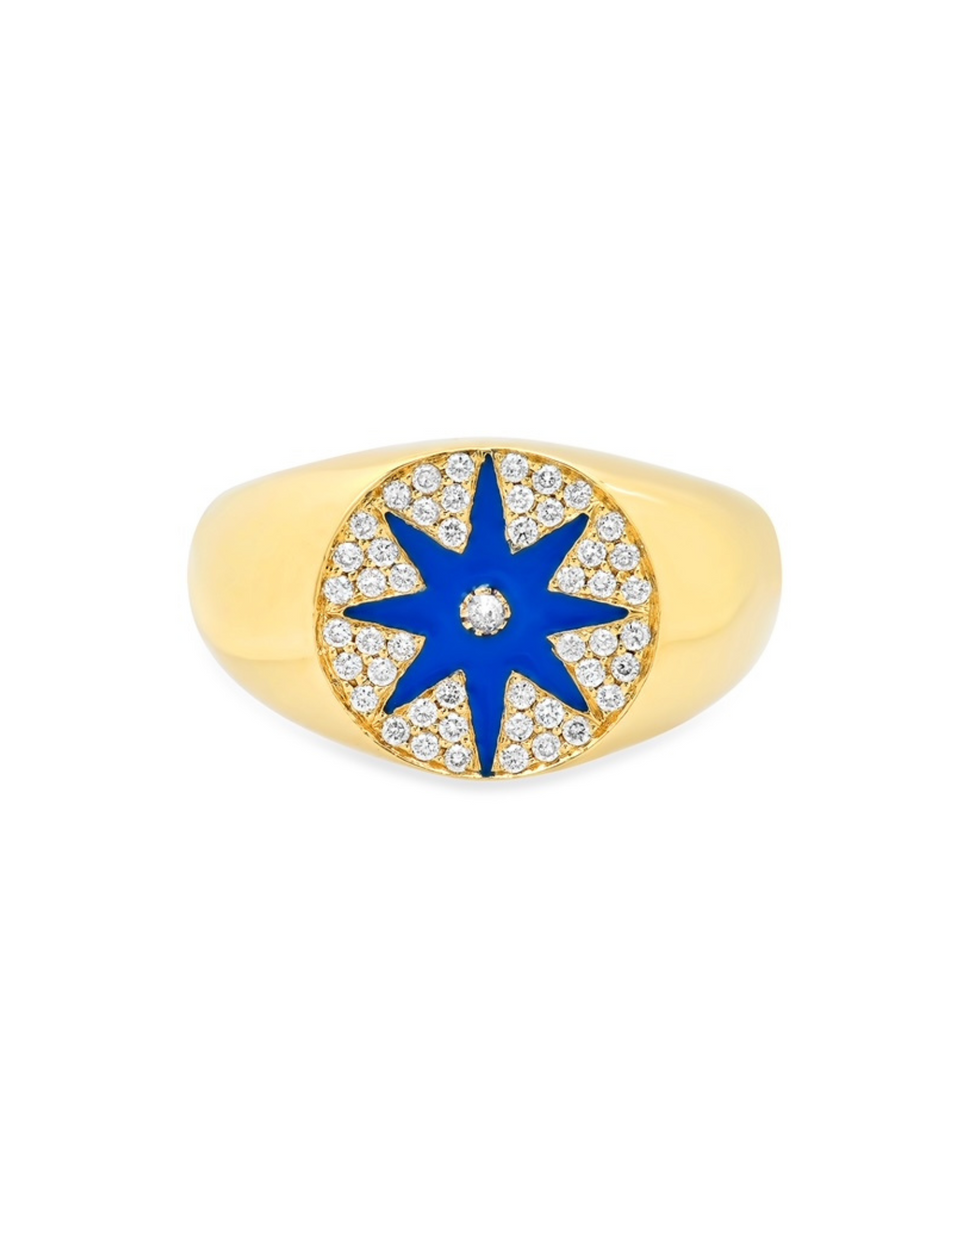 colette jewelry, colette jewelry signet rings, colette jewelry bracelets, colette jewelry, colette jewelry necklace, colette jewelry rings colette jewelry sale, colette jewelry retailer, colette jewelry gatsby initial